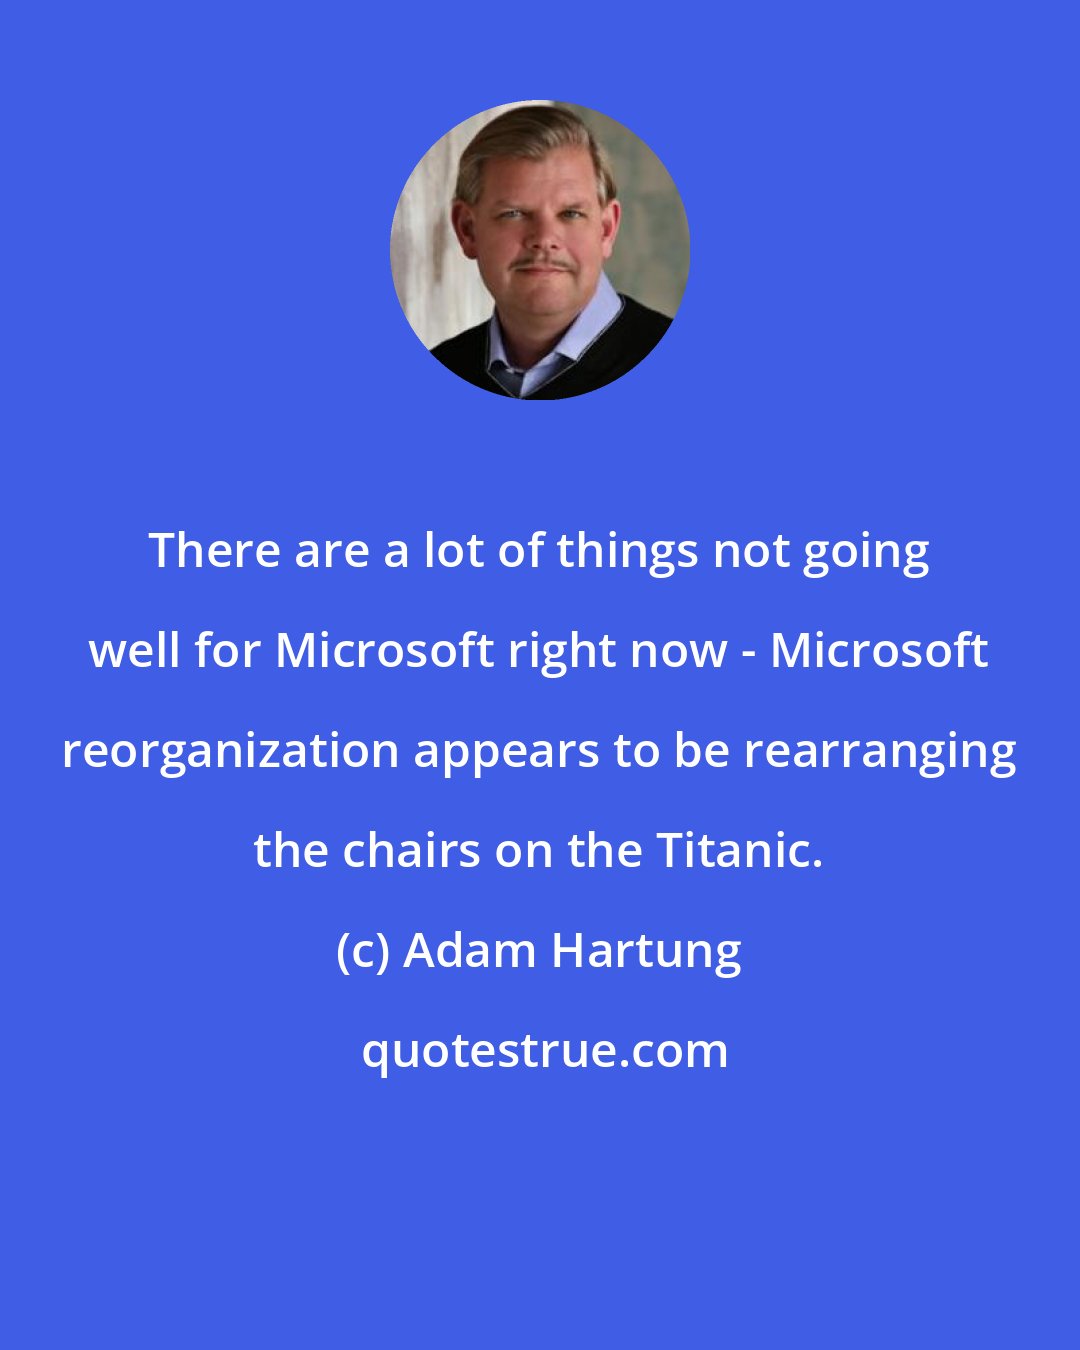 Adam Hartung: There are a lot of things not going well for Microsoft right now - Microsoft reorganization appears to be rearranging the chairs on the Titanic.